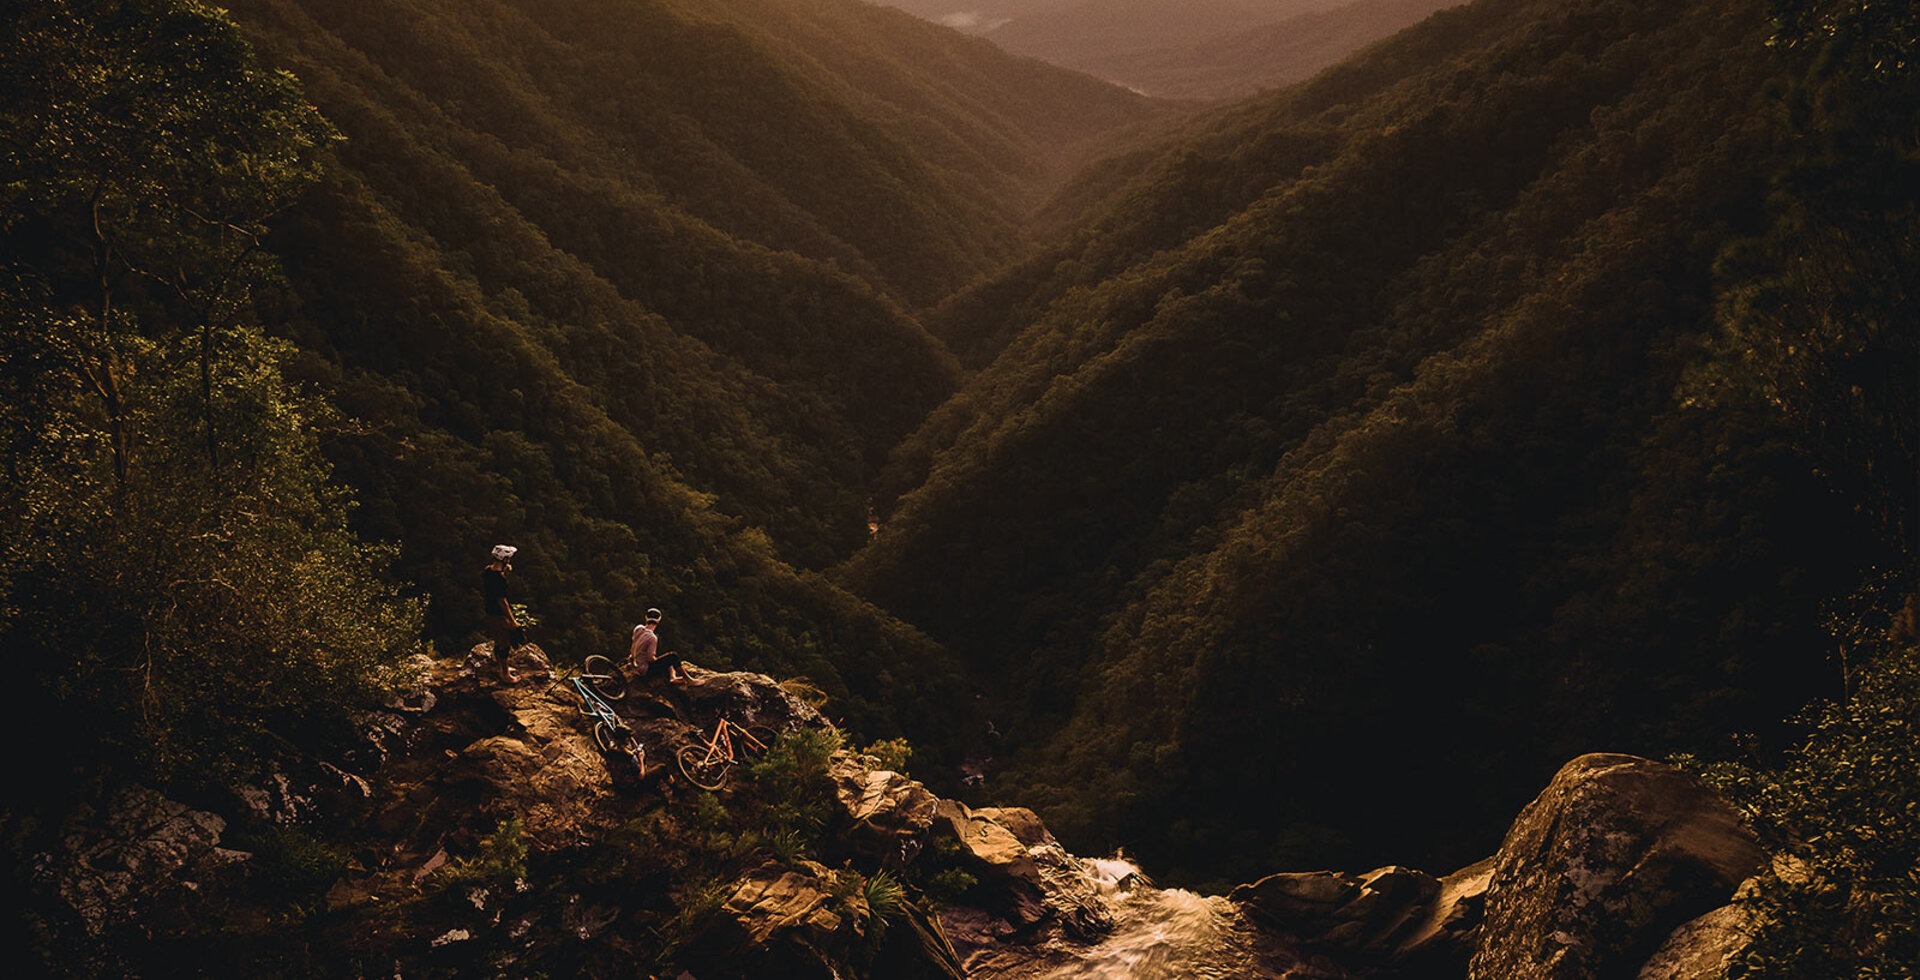 Awash in morning light, Berend Boer, Joel Sutherland and Mel Popov take in the view from Windin Falls in the Wooroonooran National Park south of Cairns.